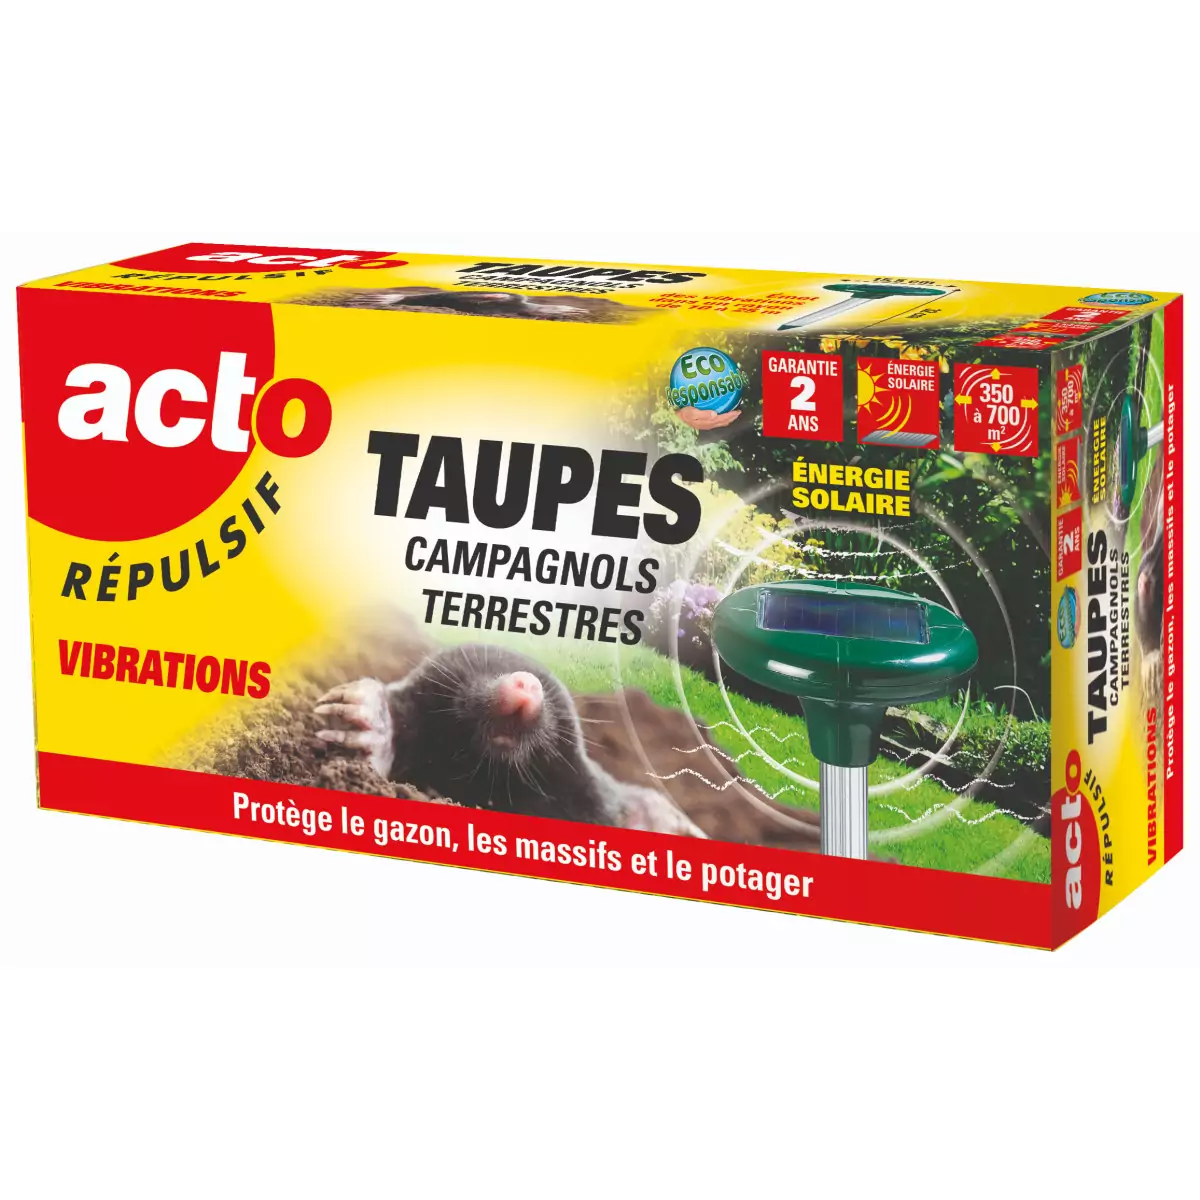 Anti taupe à ultrason energie solaire.